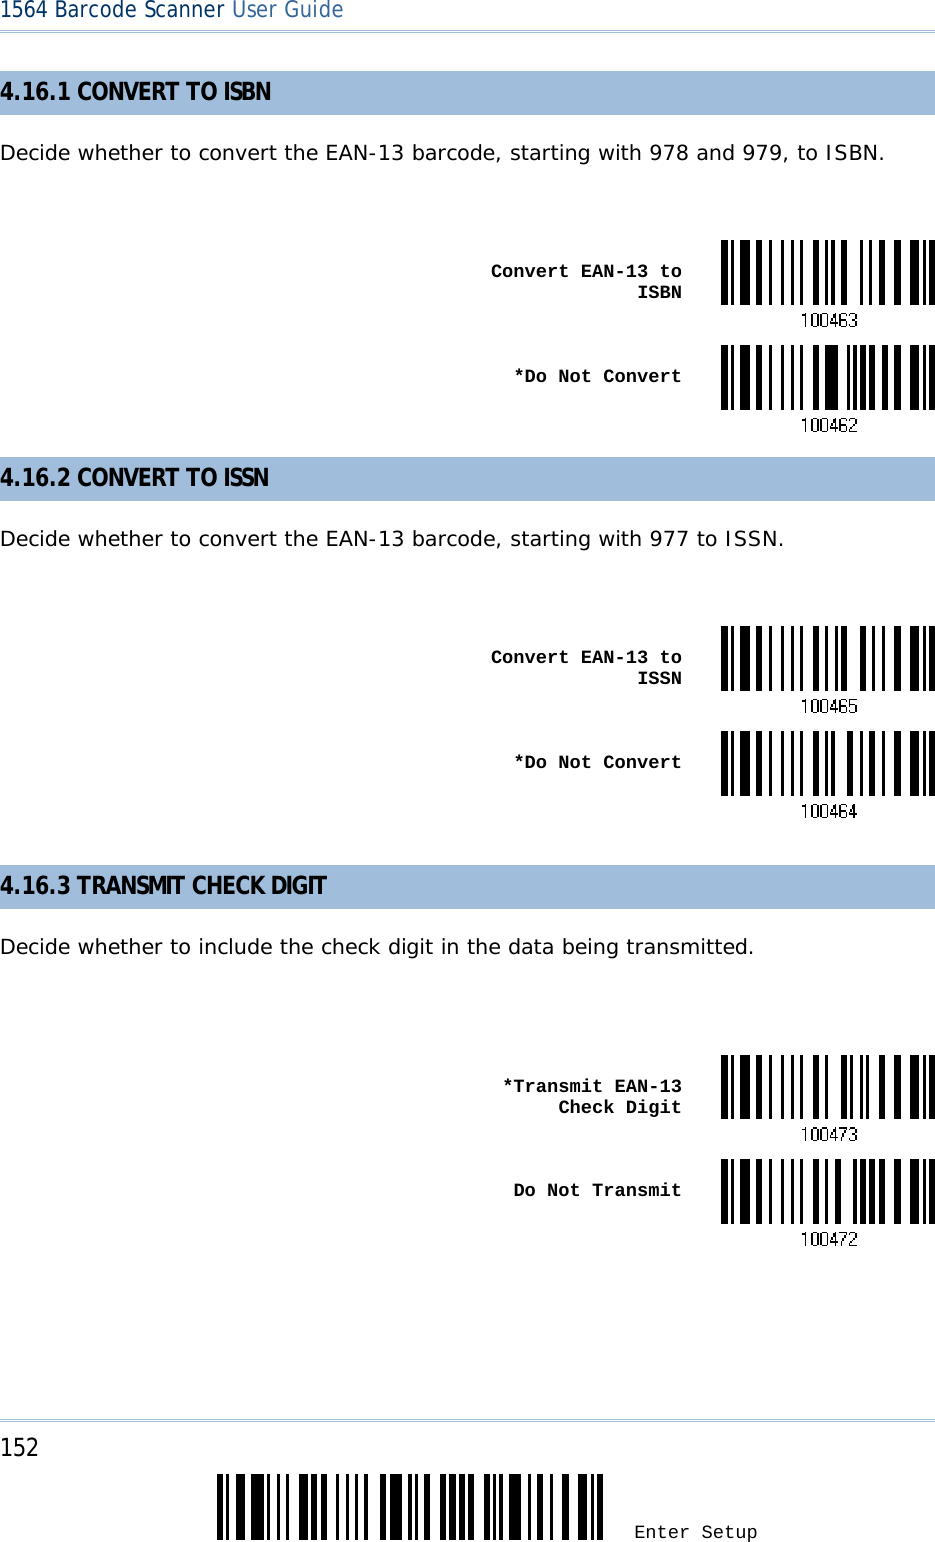 152 Enter Setup 1564 Barcode Scanner User Guide  4.16.1 CONVERT TO ISBN Decide whether to convert the EAN-13 barcode, starting with 978 and 979, to ISBN.   Convert EAN-13 to ISBN *Do Not Convert4.16.2 CONVERT TO ISSN Decide whether to convert the EAN-13 barcode, starting with 977 to ISSN.   Convert EAN-13 to ISSN *Do Not Convert 4.16.3 TRANSMIT CHECK DIGIT Decide whether to include the check digit in the data being transmitted.    *Transmit EAN-13 Check Digit Do Not Transmit     